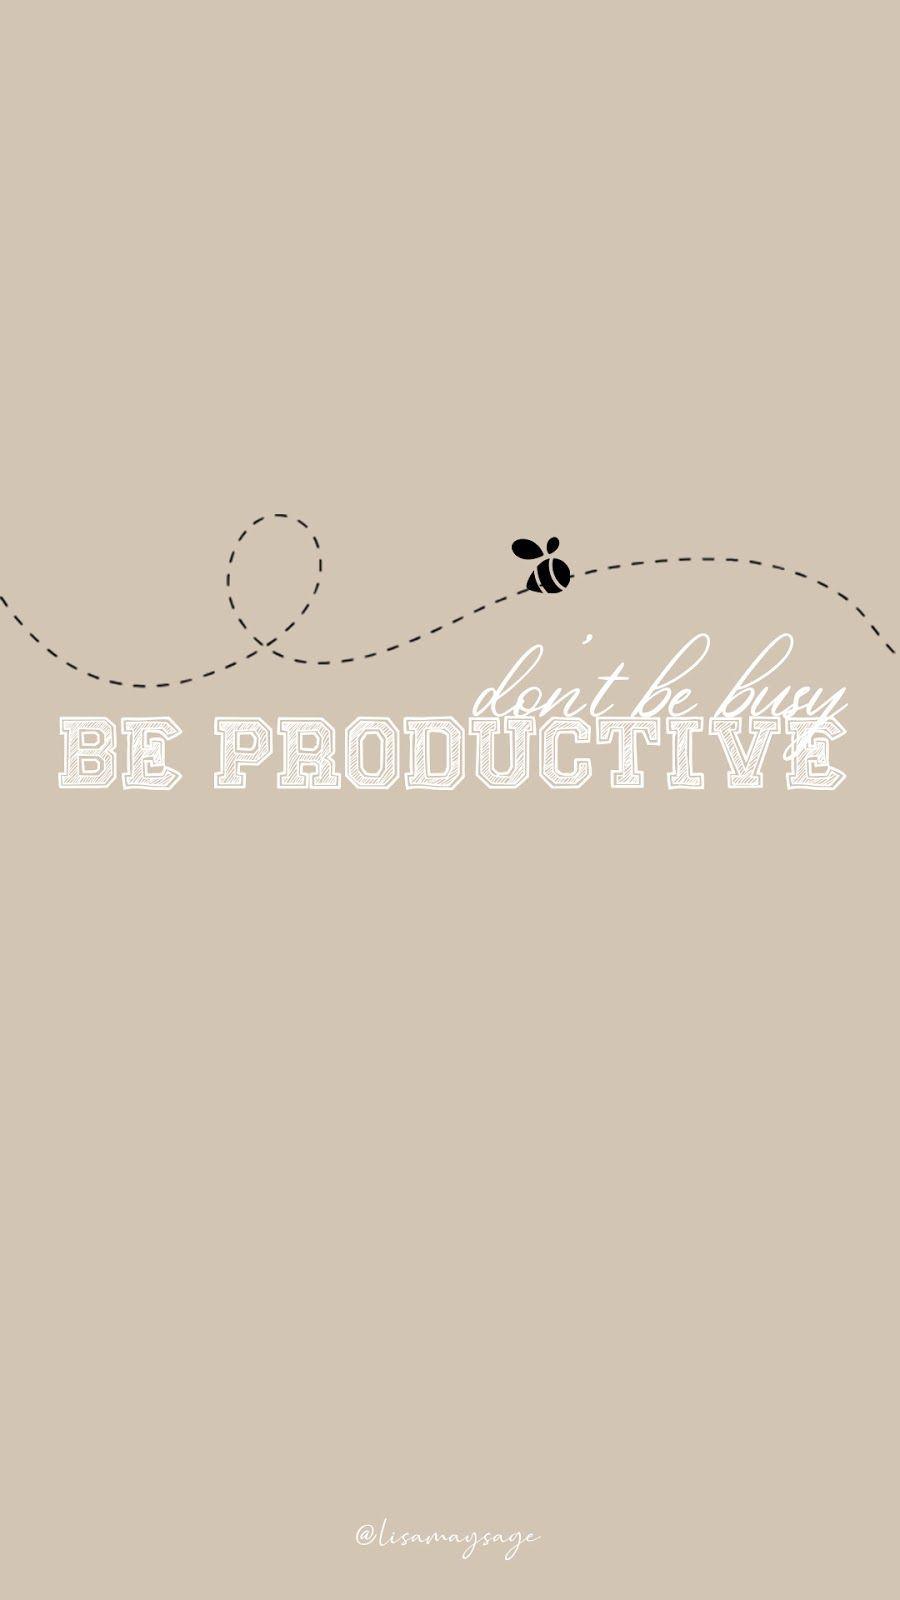 Be Productive Wallpapers - Top Free Be Productive Backgrounds